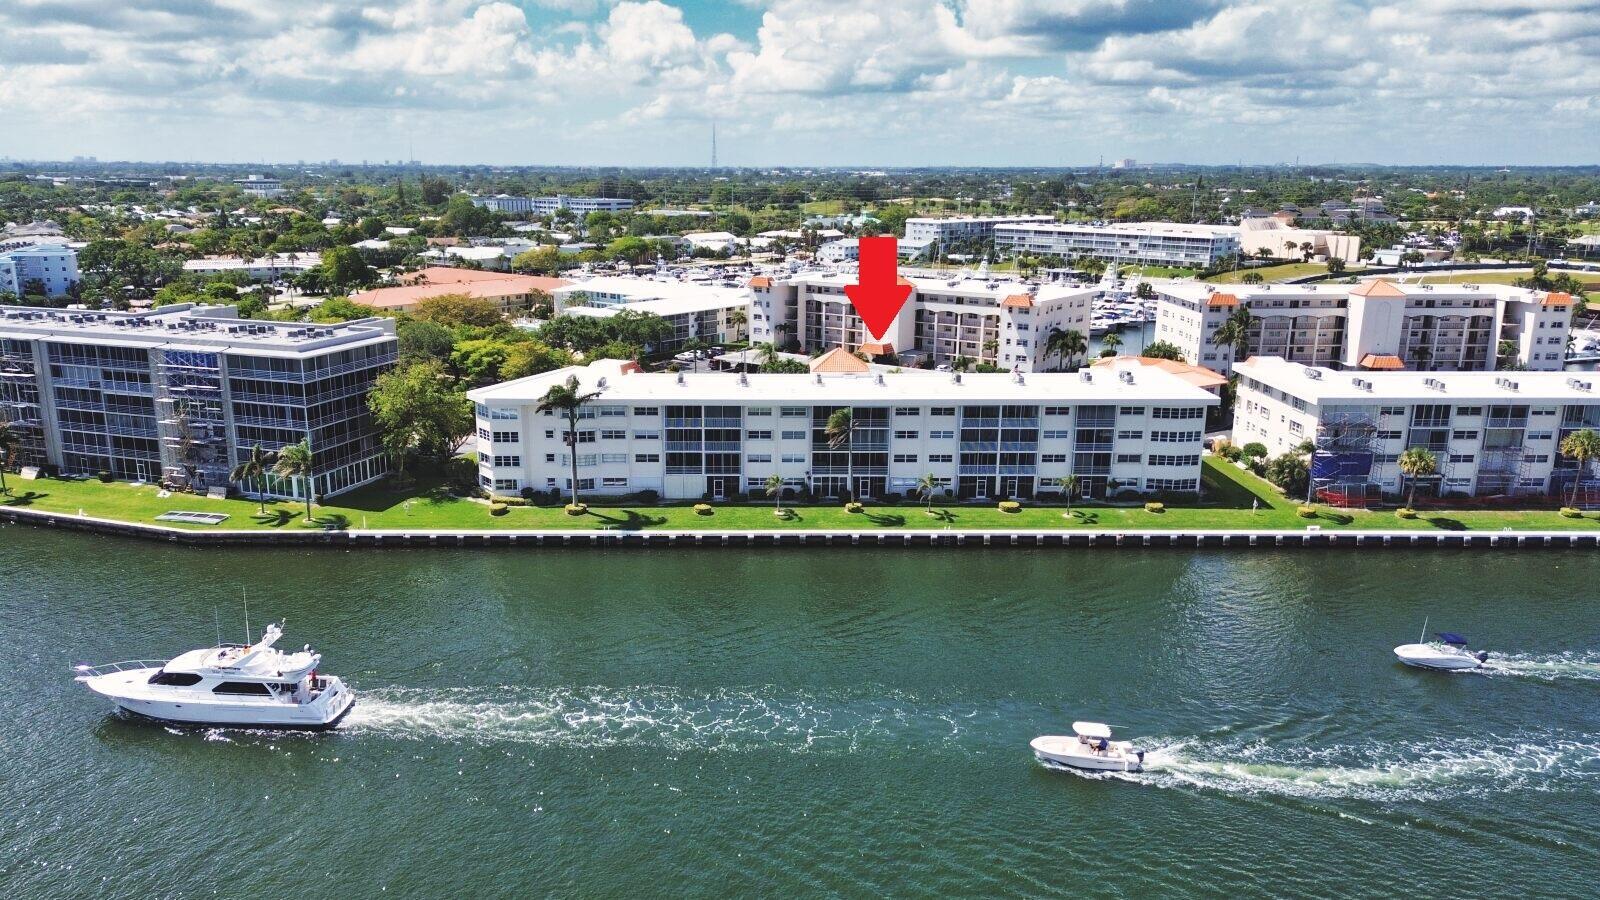 Amazing panoramic views of the Intracoastal Waterway from this 2 bedroom, 2 bath Top Floor Unit. This spacious condo is being sold furnished and turnkey.  Watch the yachts pass by from your own private penthouse balcony. This unit features a new AC unit and water heater. Ports O Call is conveniently located close to the marina, North Palm Beach Country Club, Gardens Mall, restaurants, shopping, grocery stores and the areas best beaches at Juno Beach and Singer Island. There is also a community pool, clubhouse, and free laundry facilities located on each floor. This is a 55+ community.